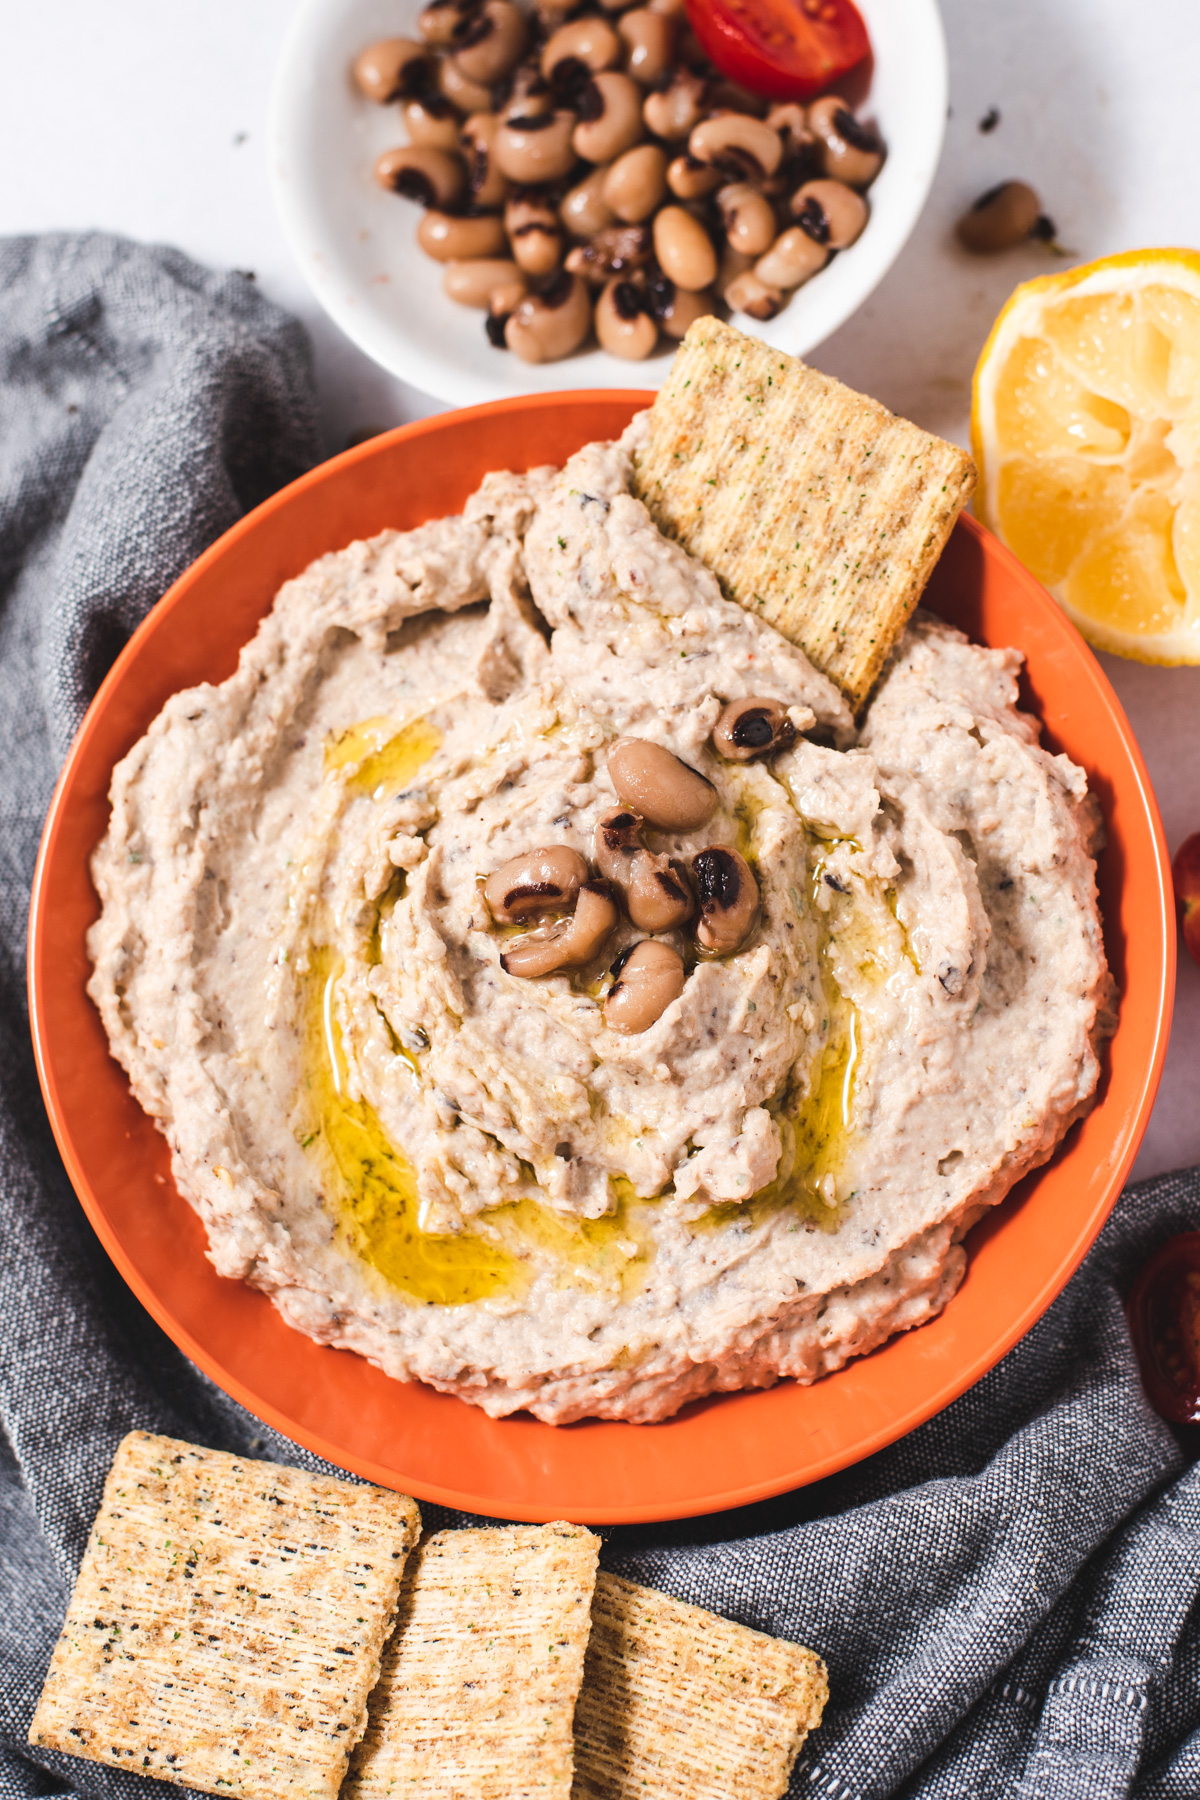 Black eyed pea hummus in a peach-colored bowl surrounded by crackers.